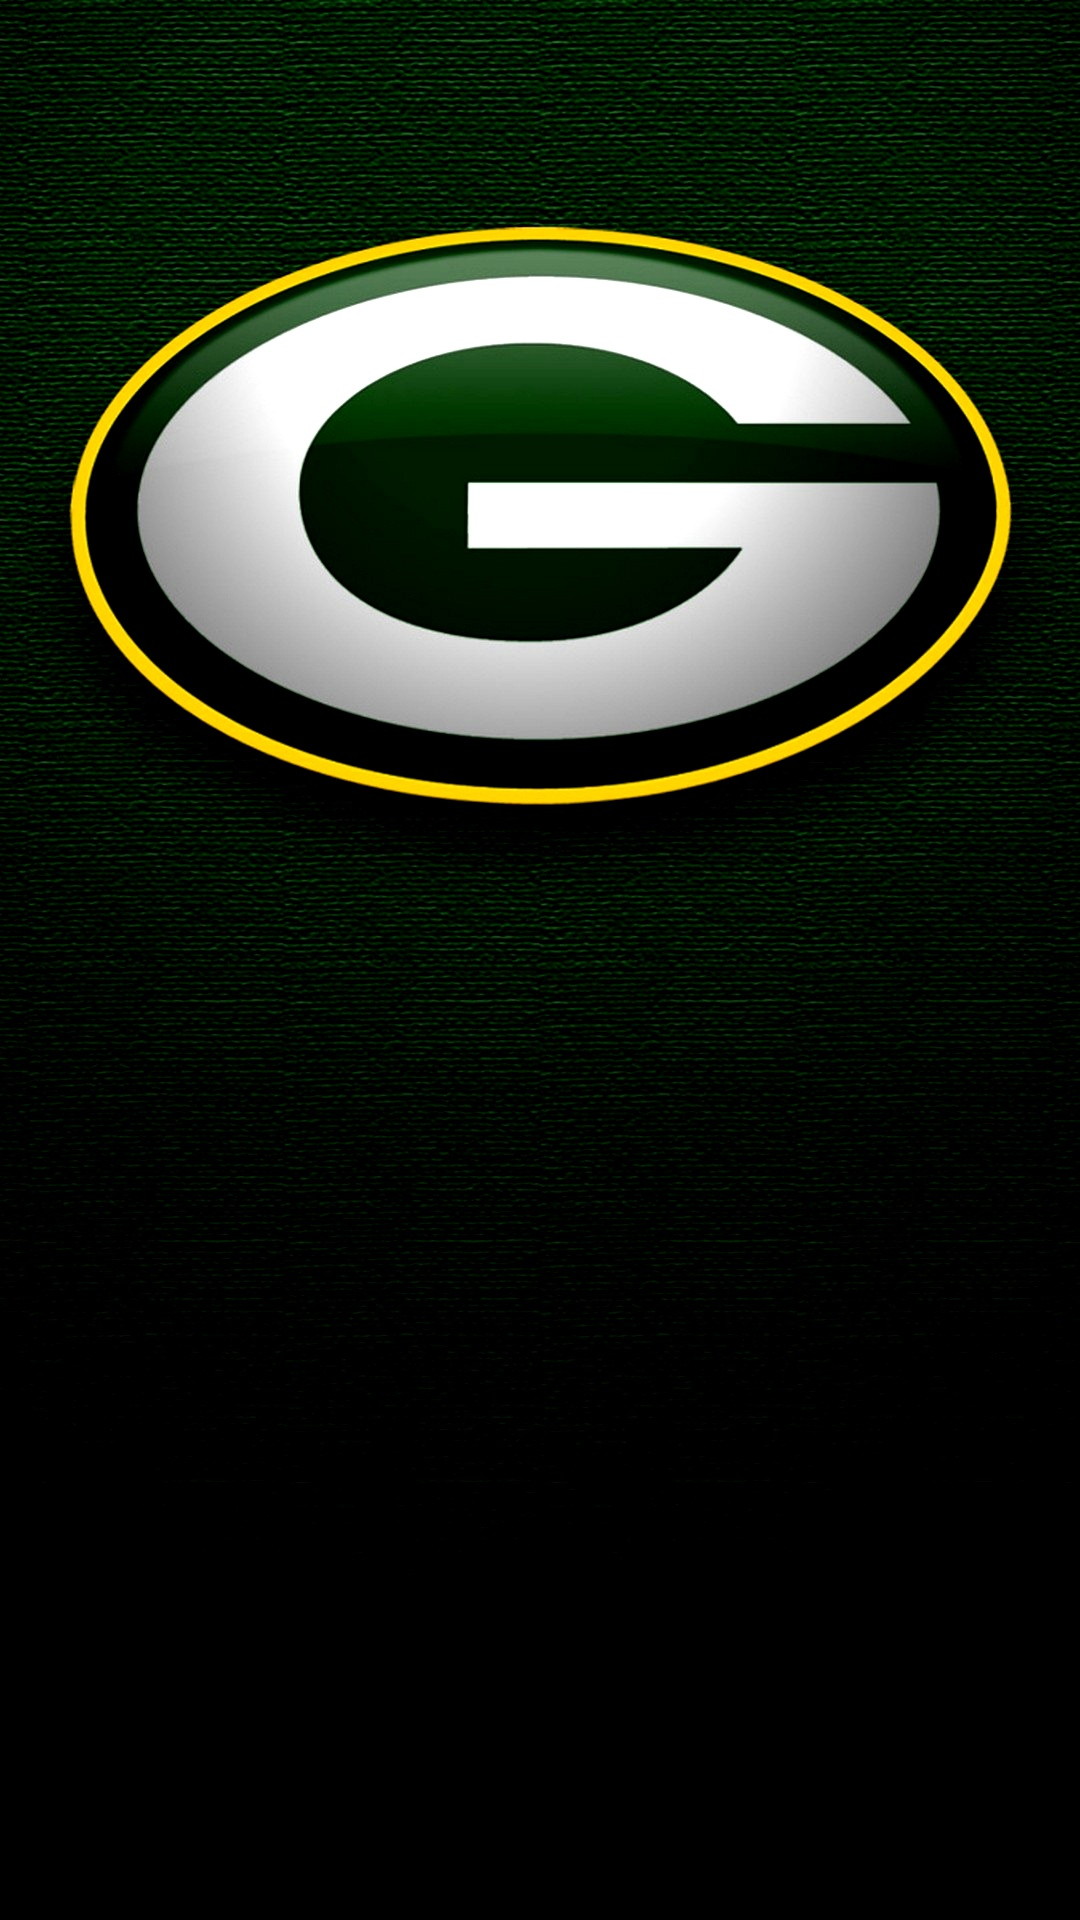 Green Bay Packers Wallpaper Mobile with high-resolution 1080x1920 pixel. You can use and set as wallpaper for Notebook Screensavers, Mac Wallpapers, Mobile Home Screen, iPhone or Android Phones Lock Screen